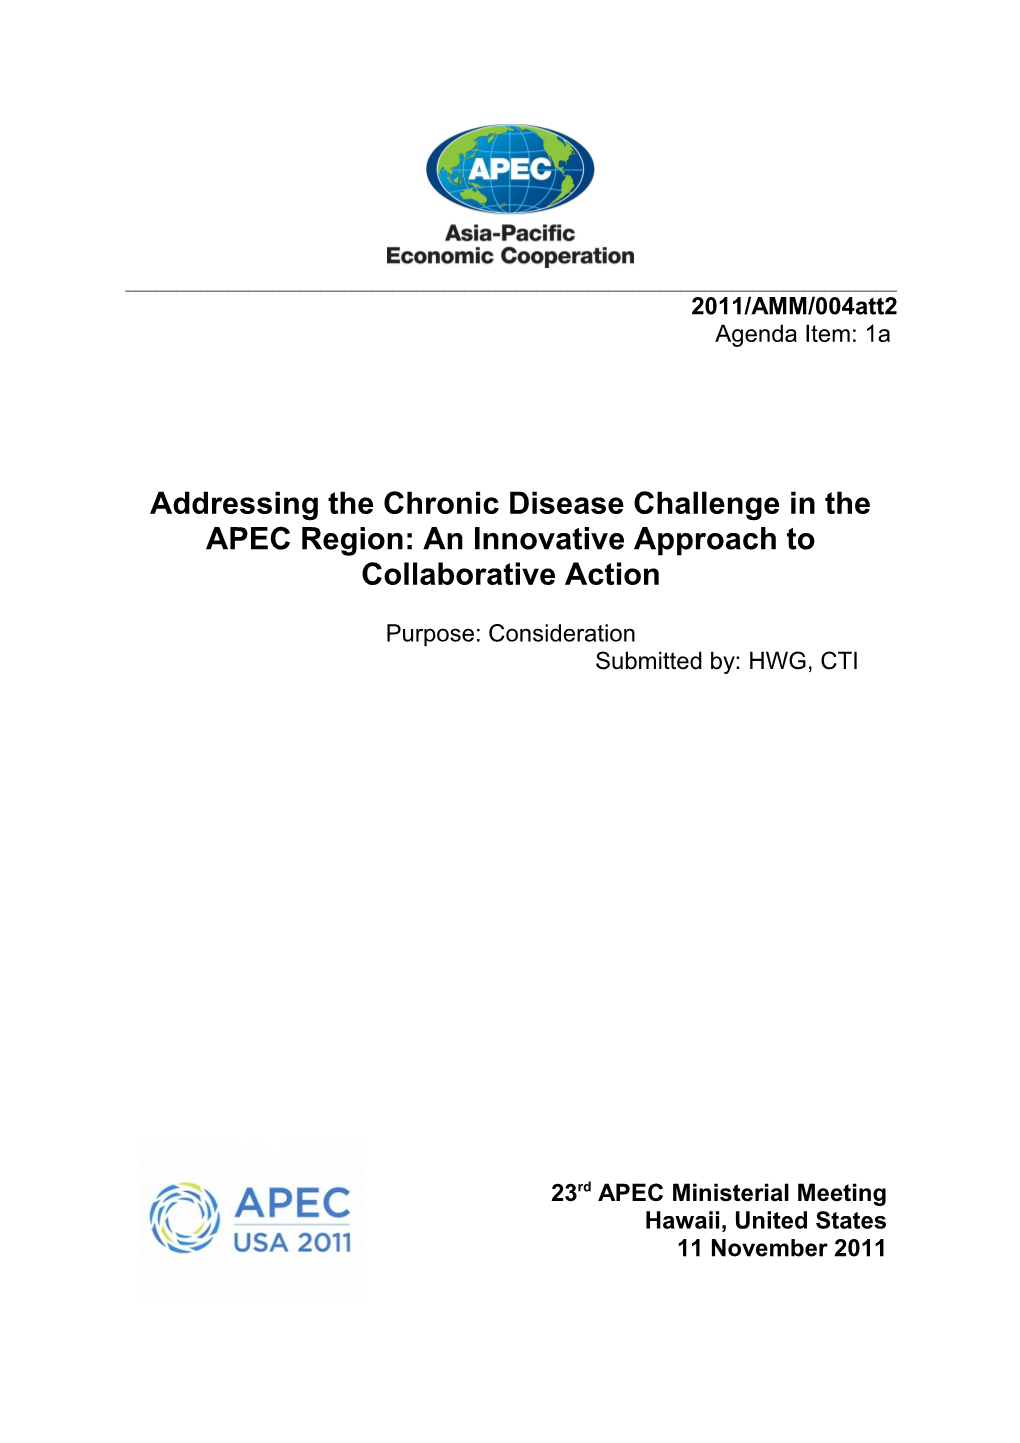 Addressing the Chronic Disease Challenge in the APEC Region: an Innovative Approach To